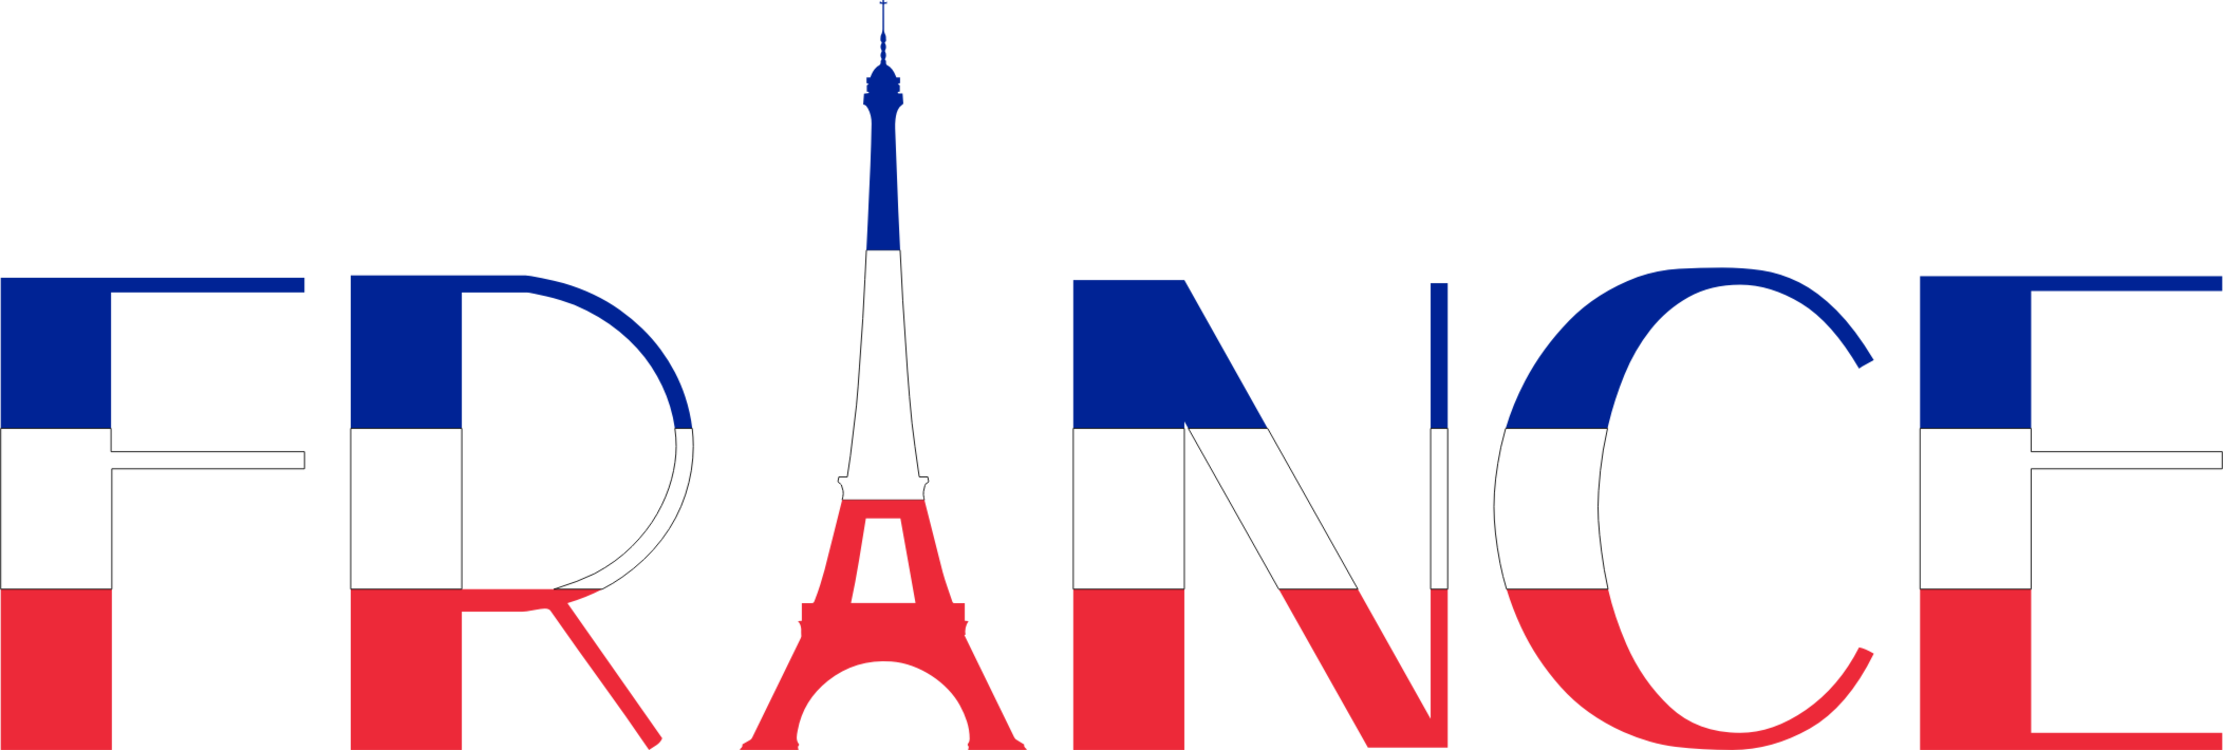 french clipart text